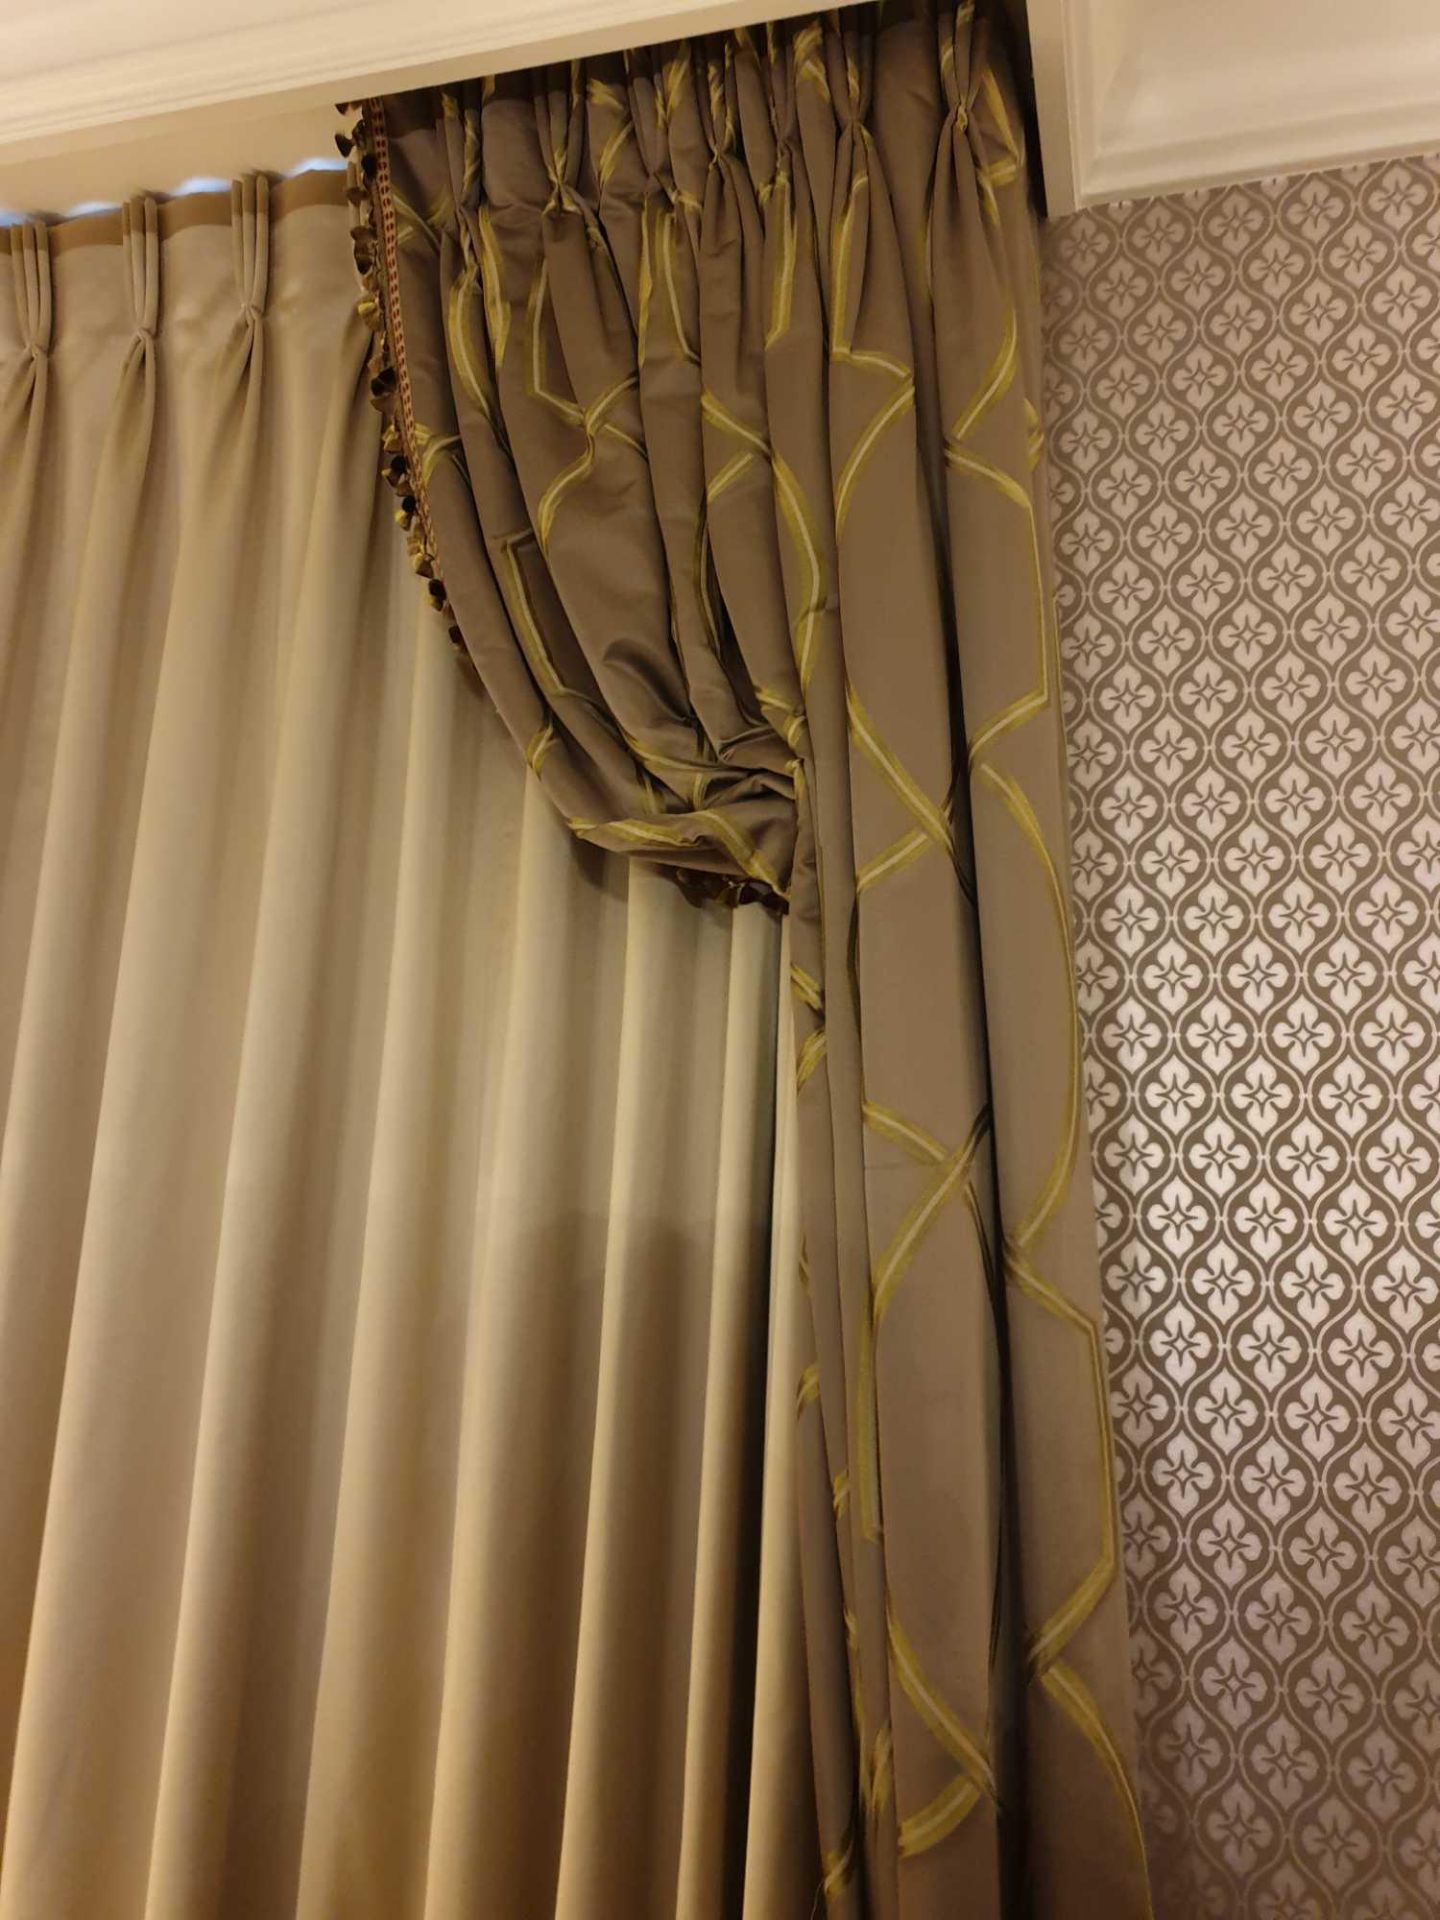 A Pair Of Silk Drapes And Jaots Dark Grey With Green And Grey Chain Pattern Tassels And Piping 210 x - Image 2 of 2